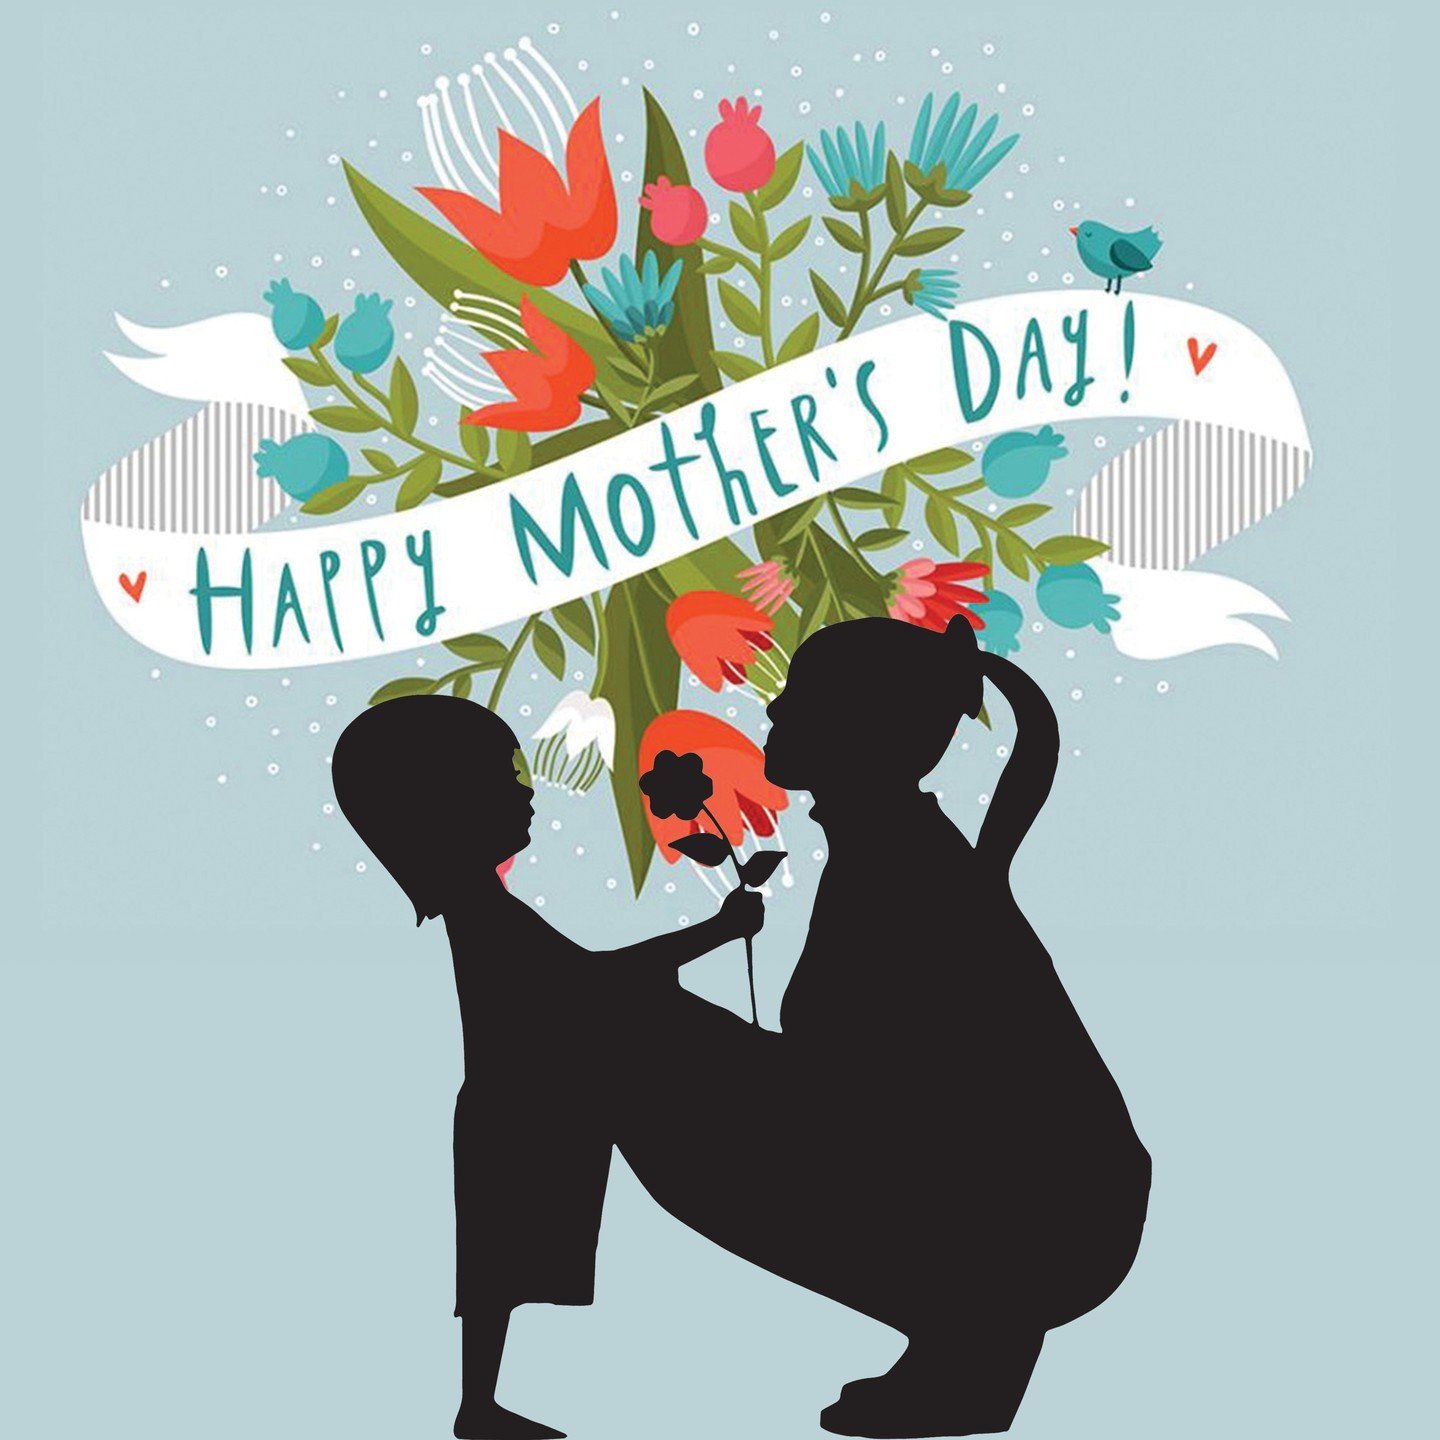 Happy Mother&rsquo;s Day from all of us at Italian Community Services! Today, we honor and celebrate the remarkable mothers in our lives. Their boundless love, strength, and resilience enrich our community and inspire us every day. Grazie mille to al